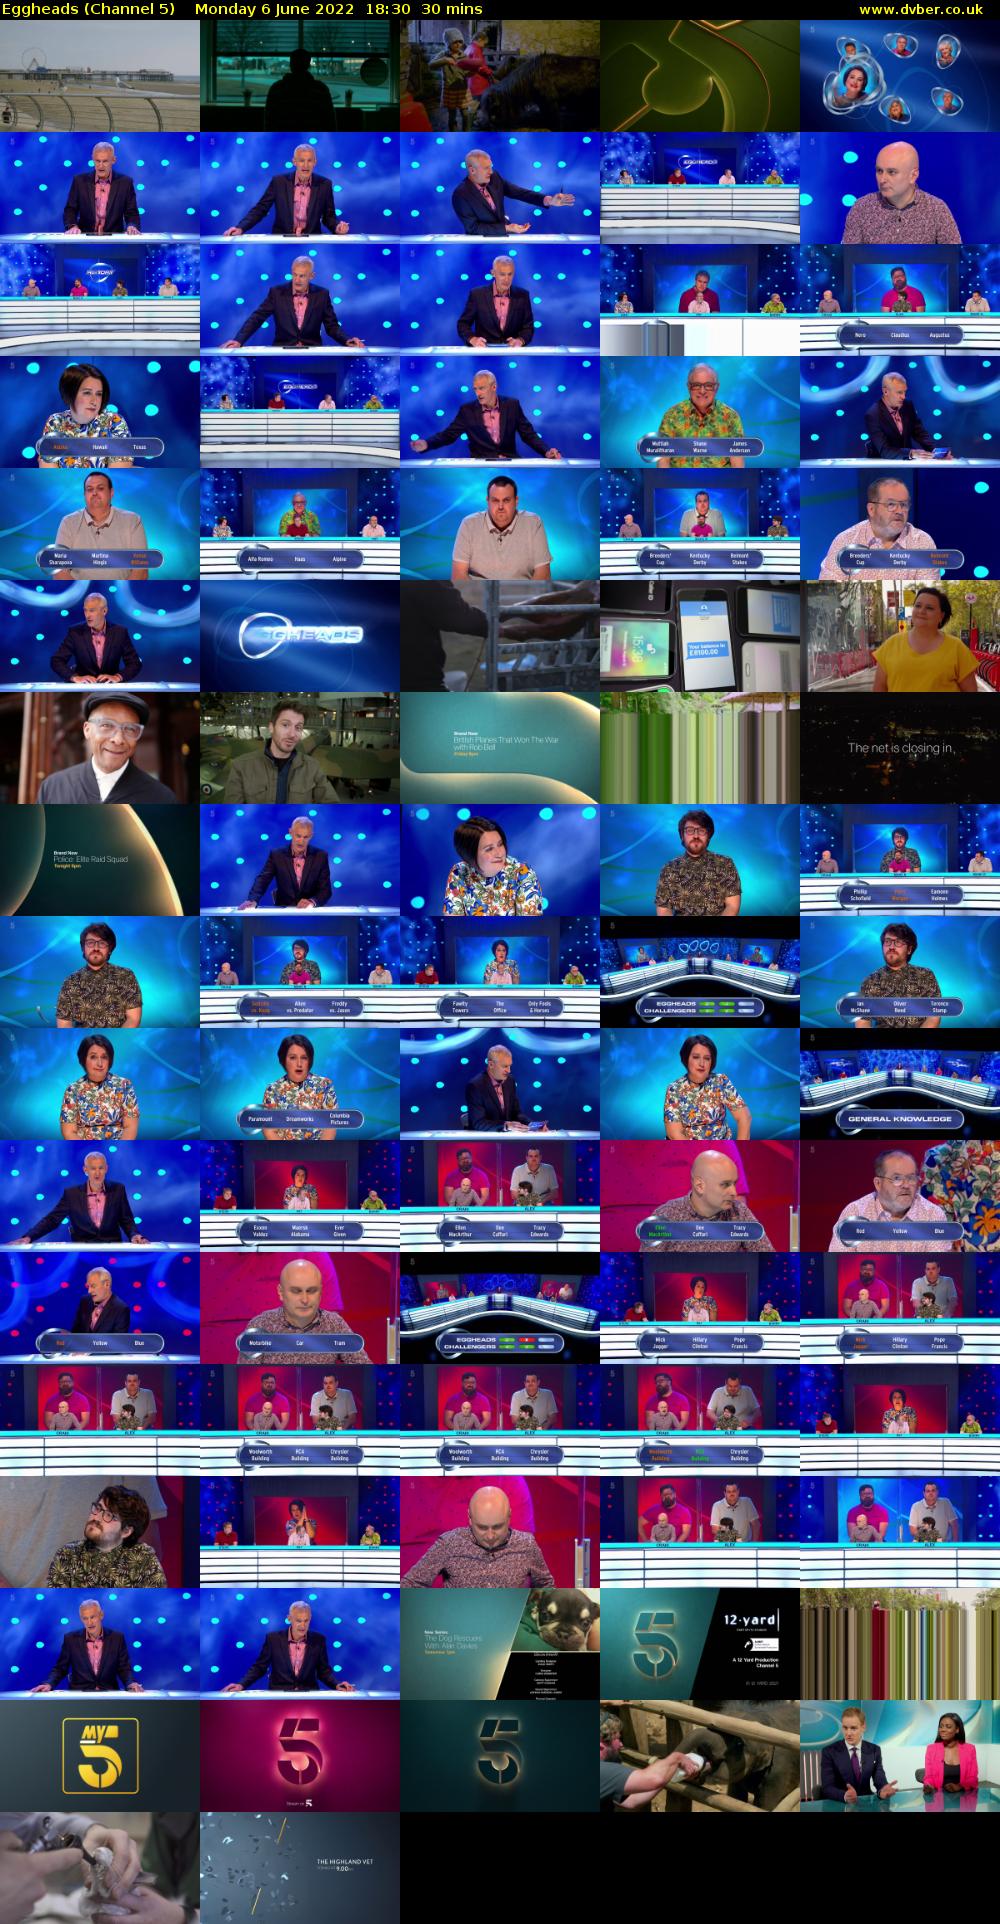 Eggheads (Channel 5) Monday 6 June 2022 18:30 - 19:00